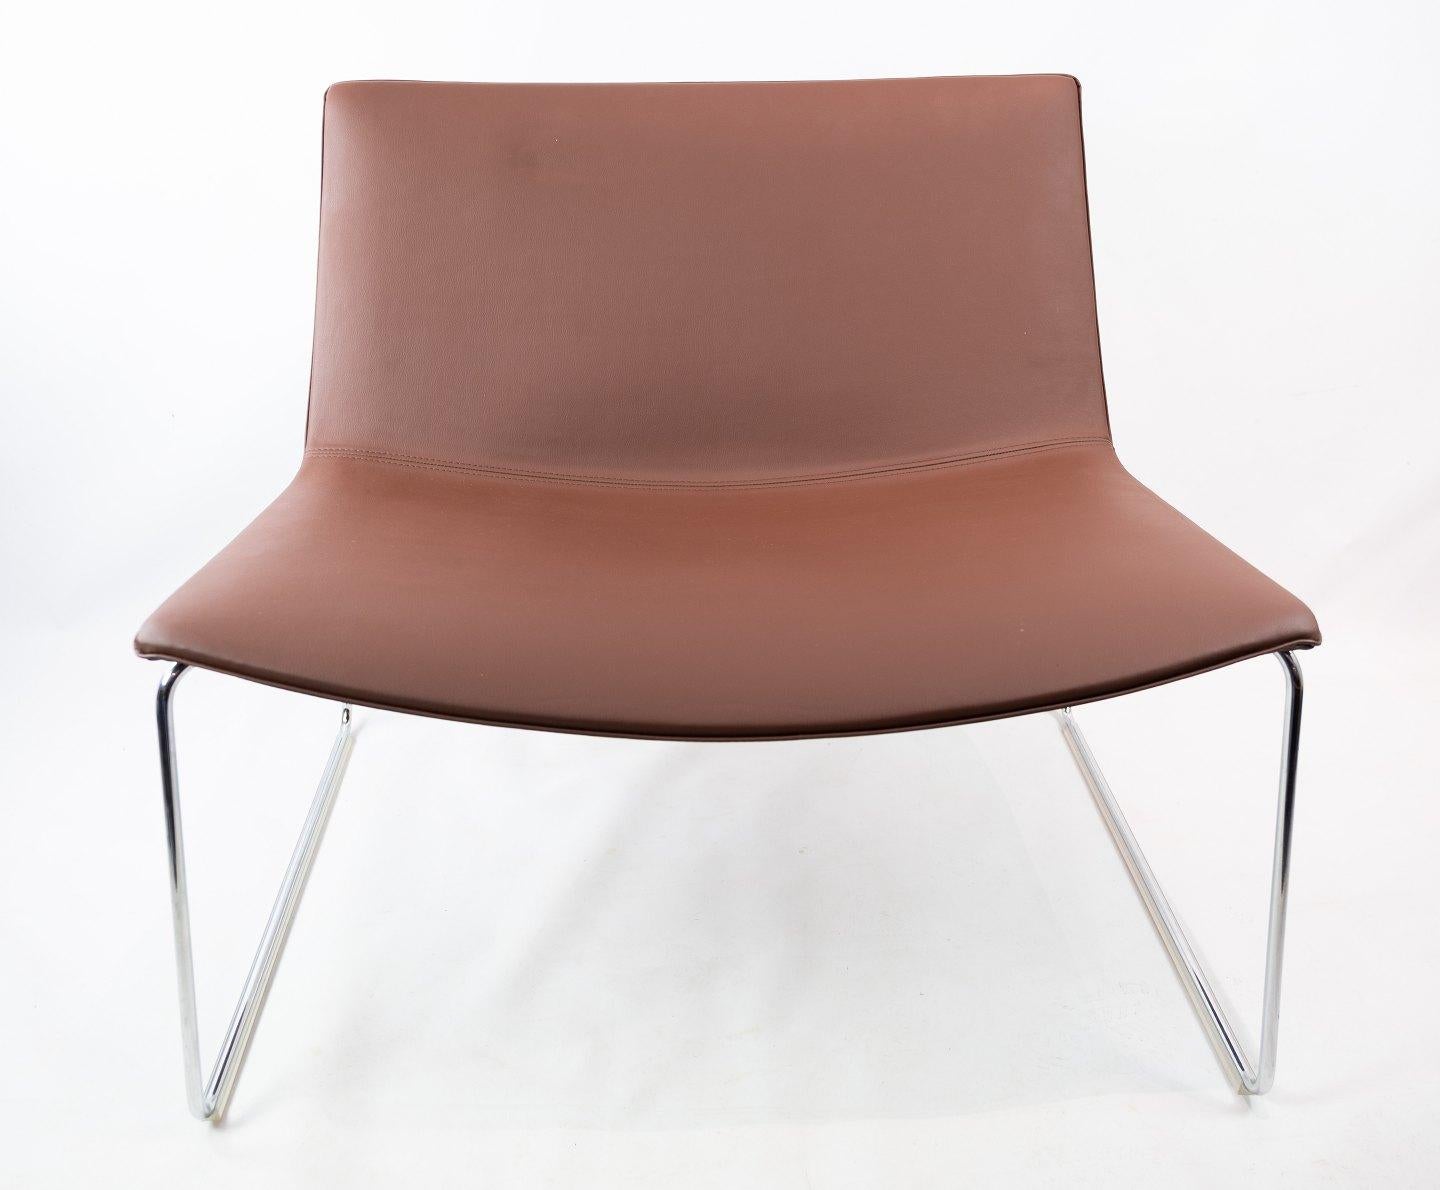 Italian easy chair designed by Lievore Altherr Molina and manufactured by Arper. Model Catifa 80 with light brown leather and chromed steel.
 